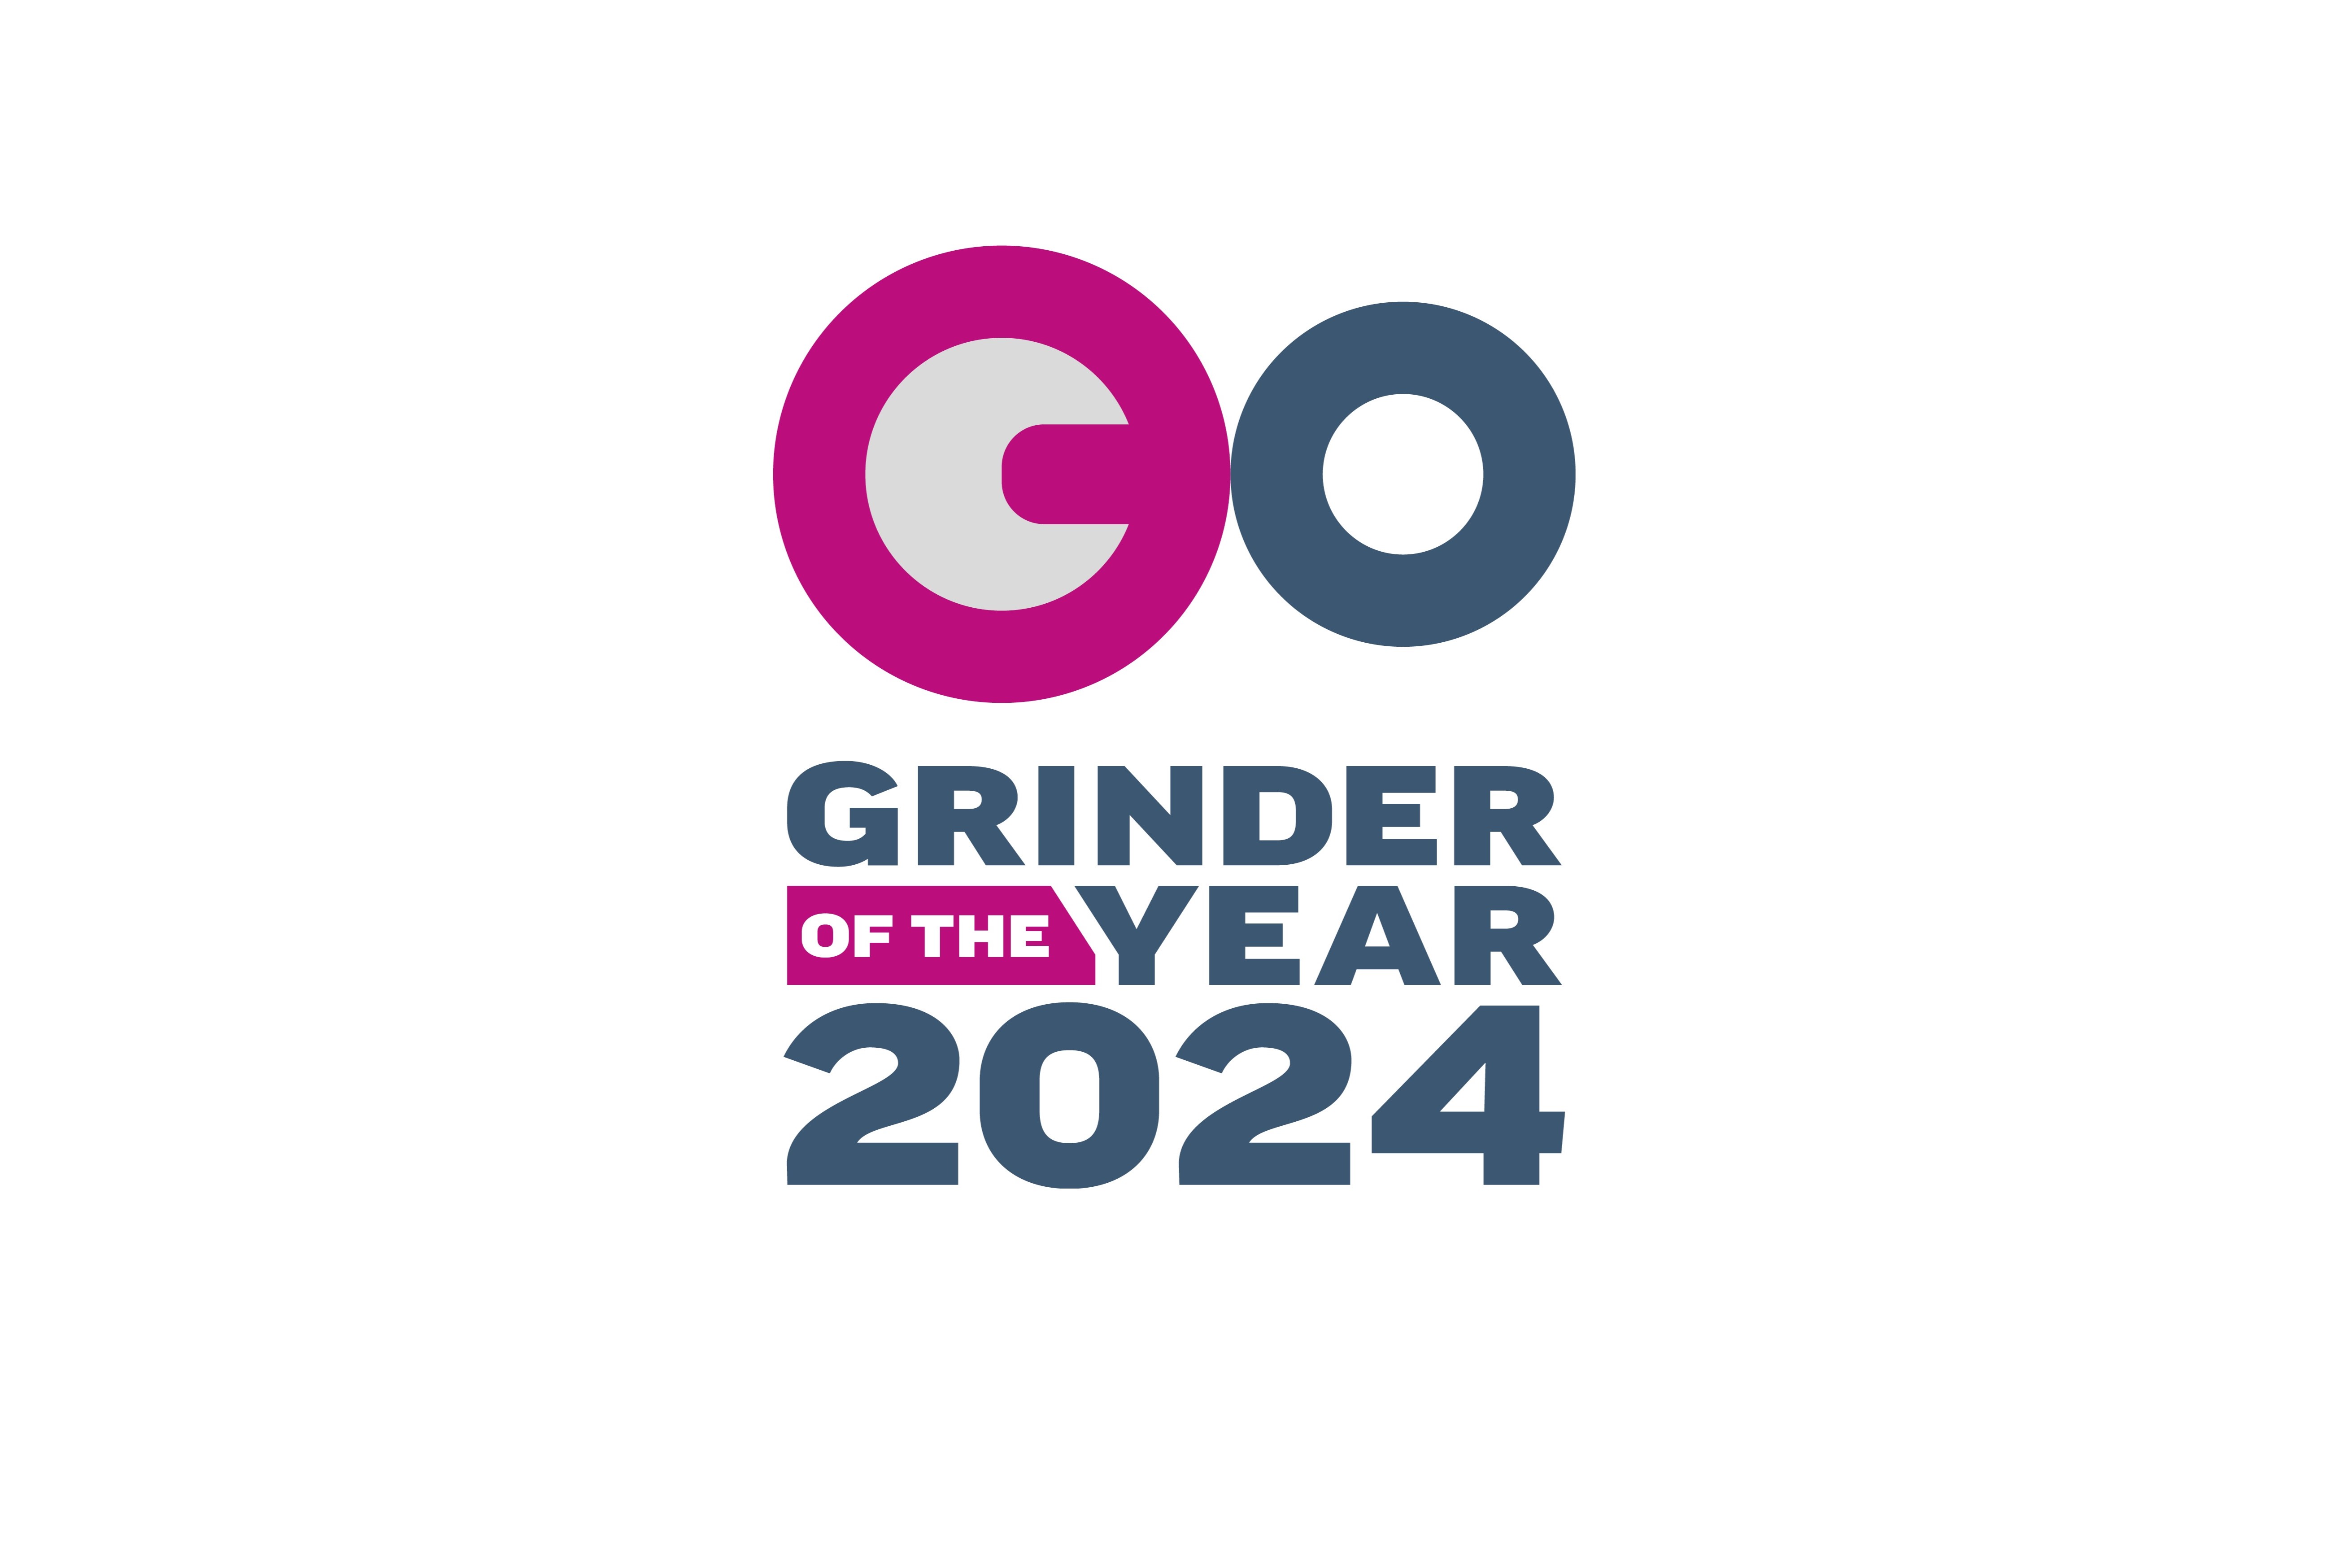 GrindingHub Grinder of the Year competition